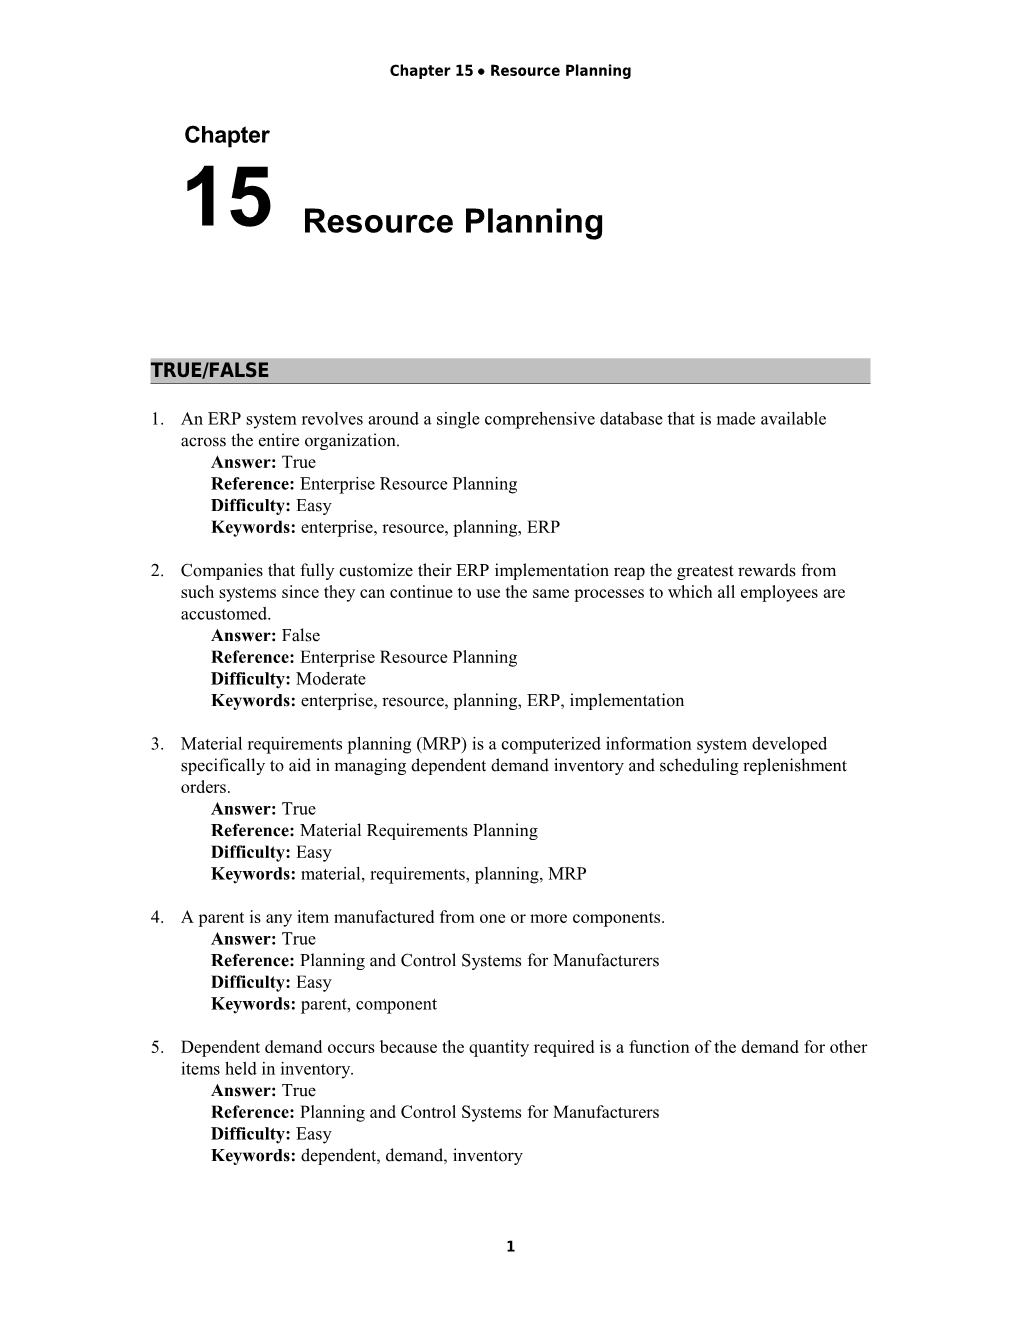 Chapter 15 Resource Planning